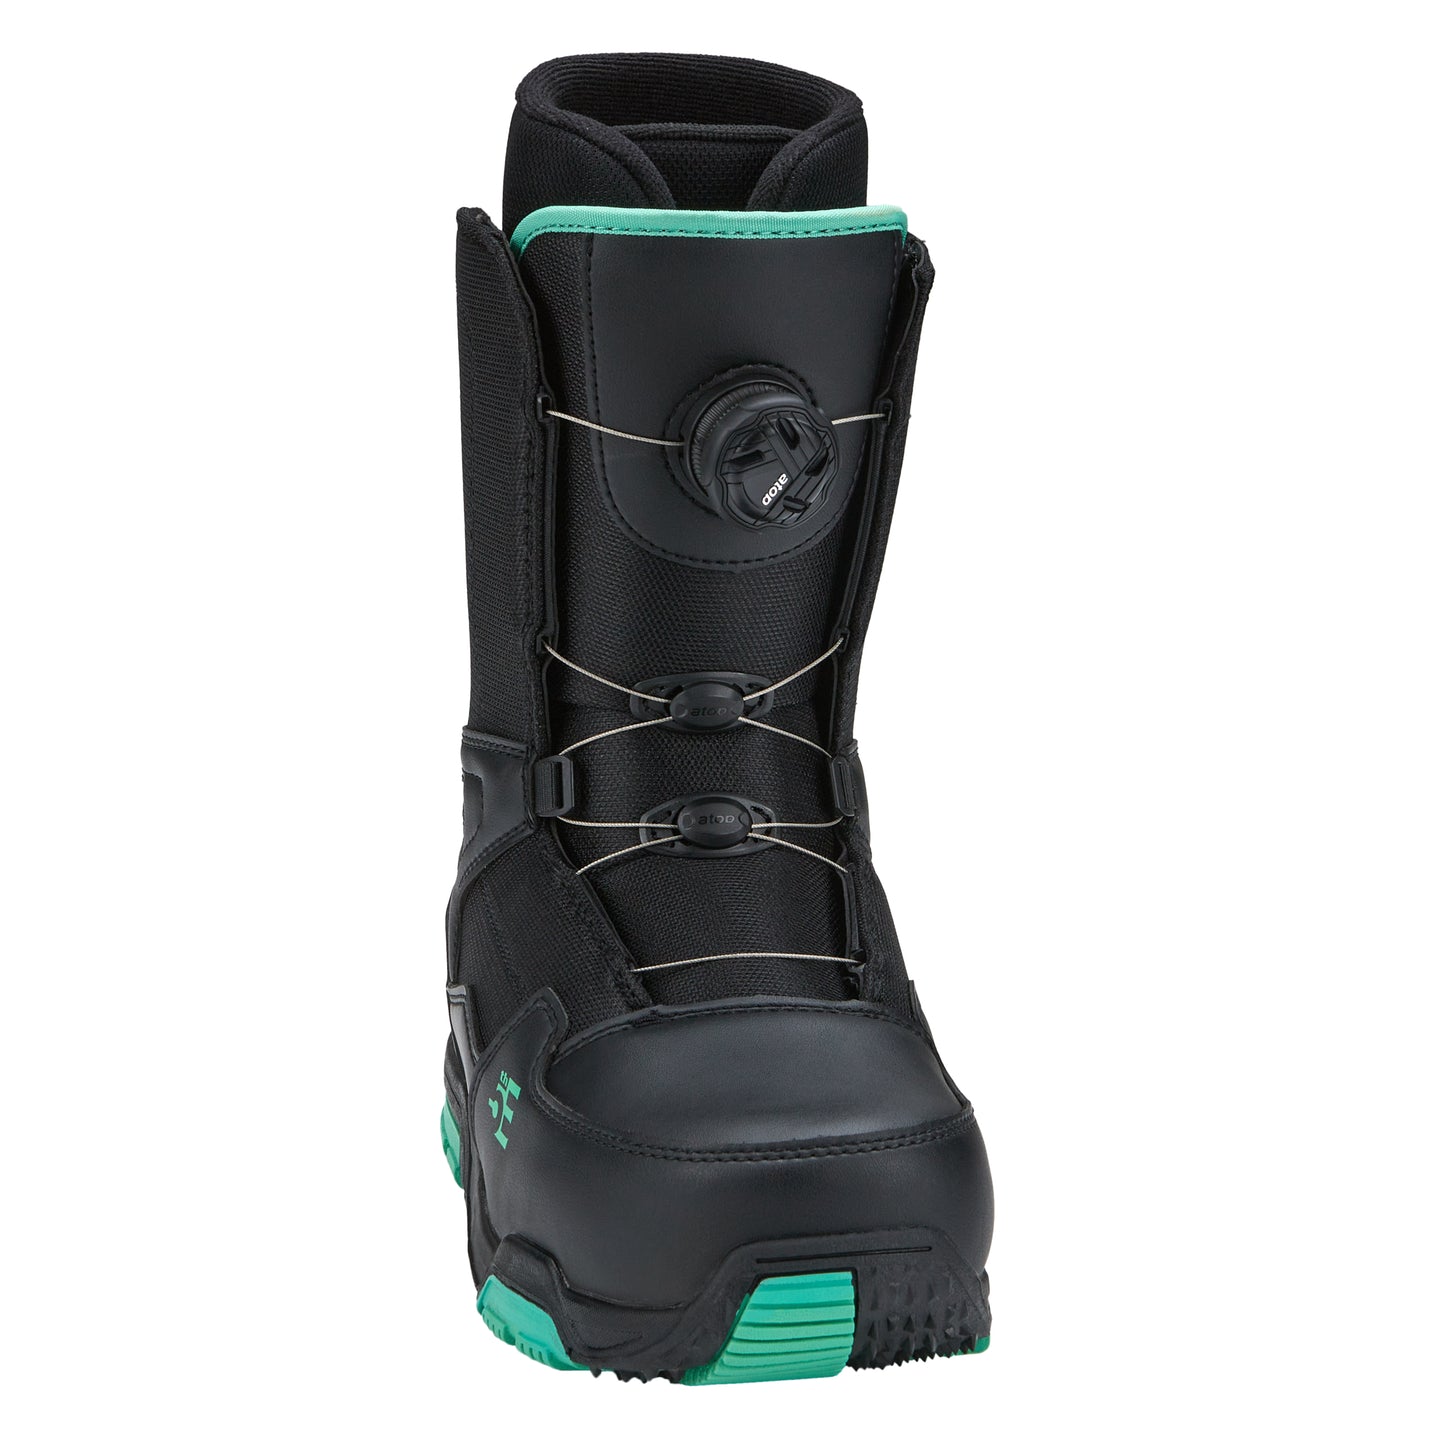 5th Element L-2 ATOP Boots - Black/Teal